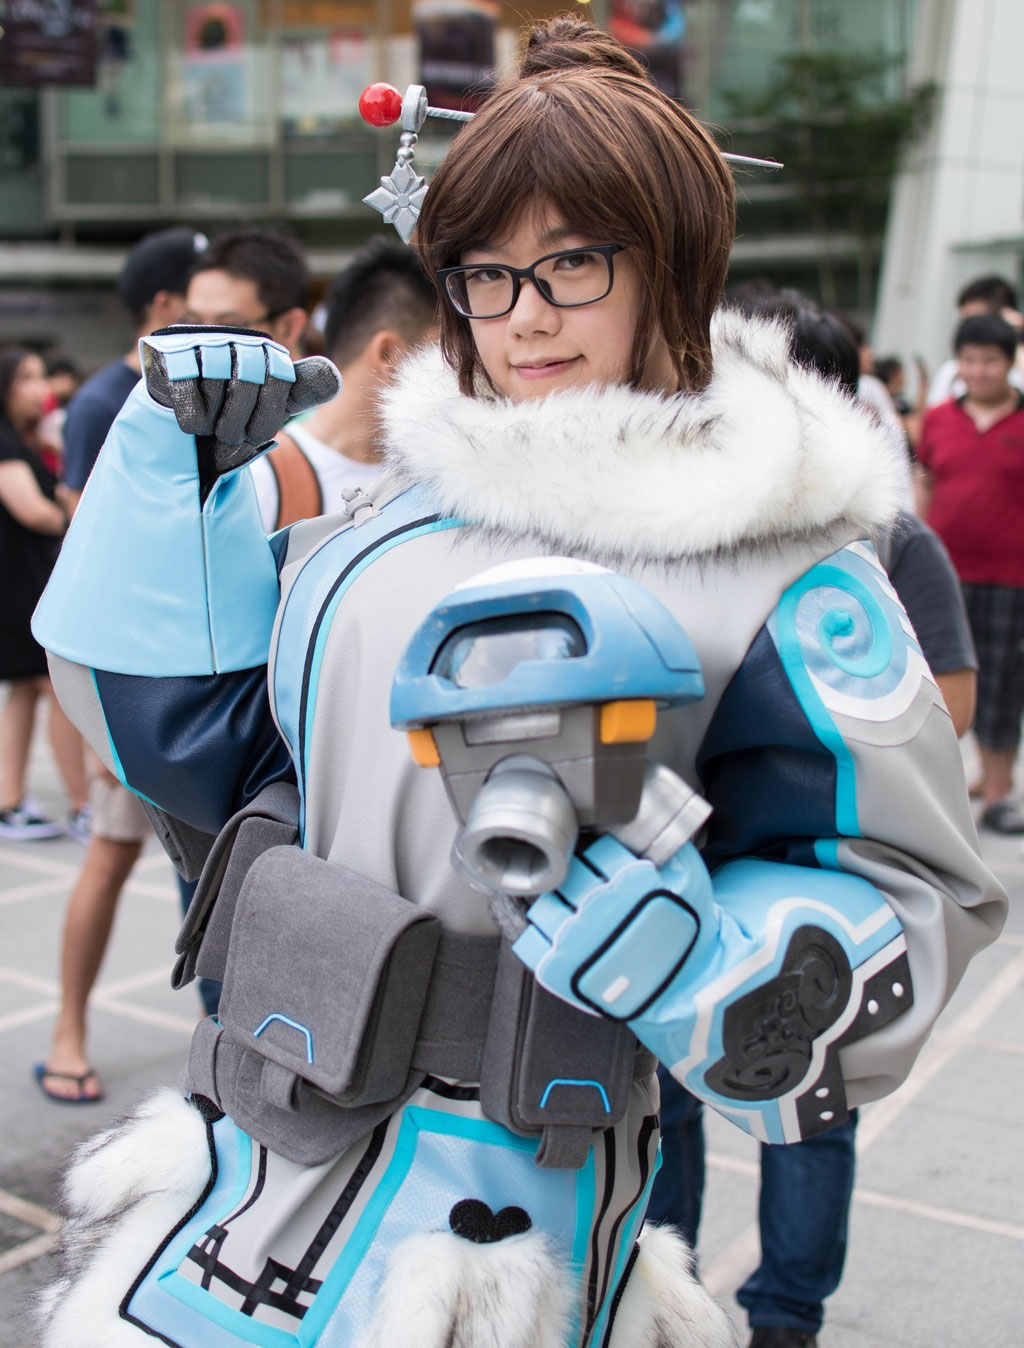 Some A-Mei-Zing Overwatch Cosplay